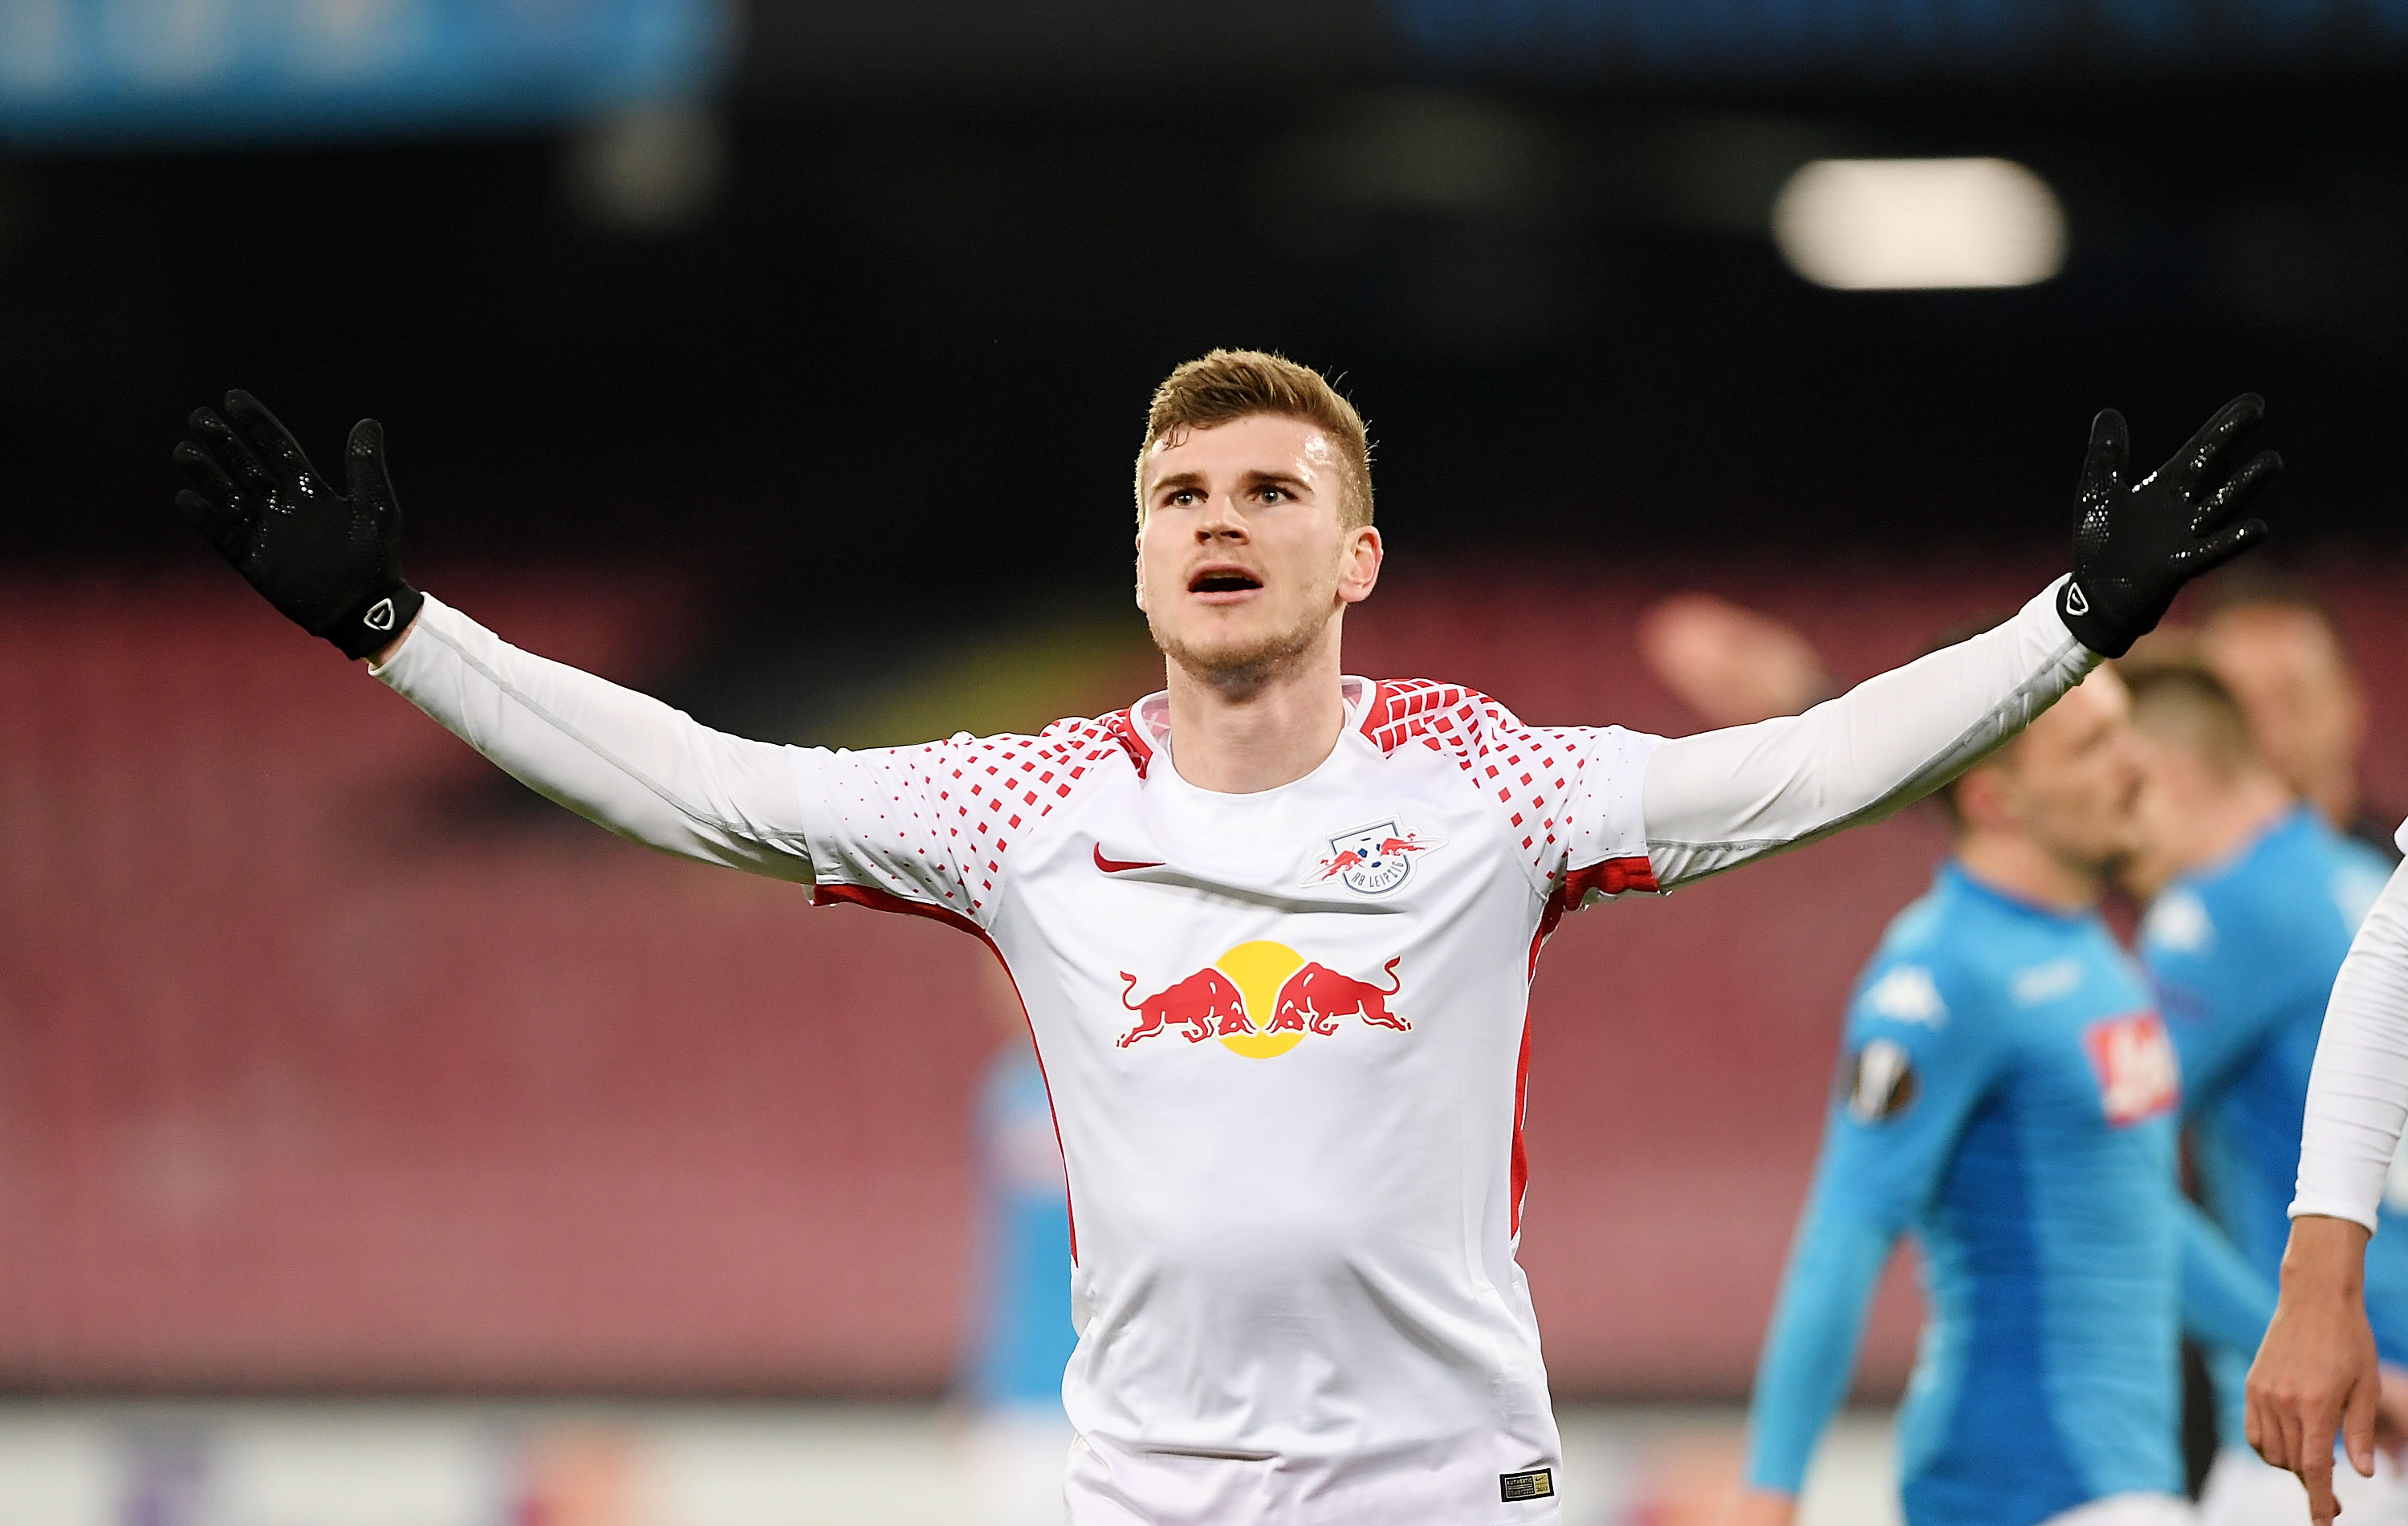 NAPLES, ITALY - FEBRUARY 15:  Timo Werner player of RB Leipzig celebrates after scoring the 1-1 goal during UEFA Europa League Round of 32 match between Napoli and RB Leipzig at the Stadio San Paolo on February 15, 2018 in Naples, Italy.  (Photo by Francesco Pecoraro/Getty Images)